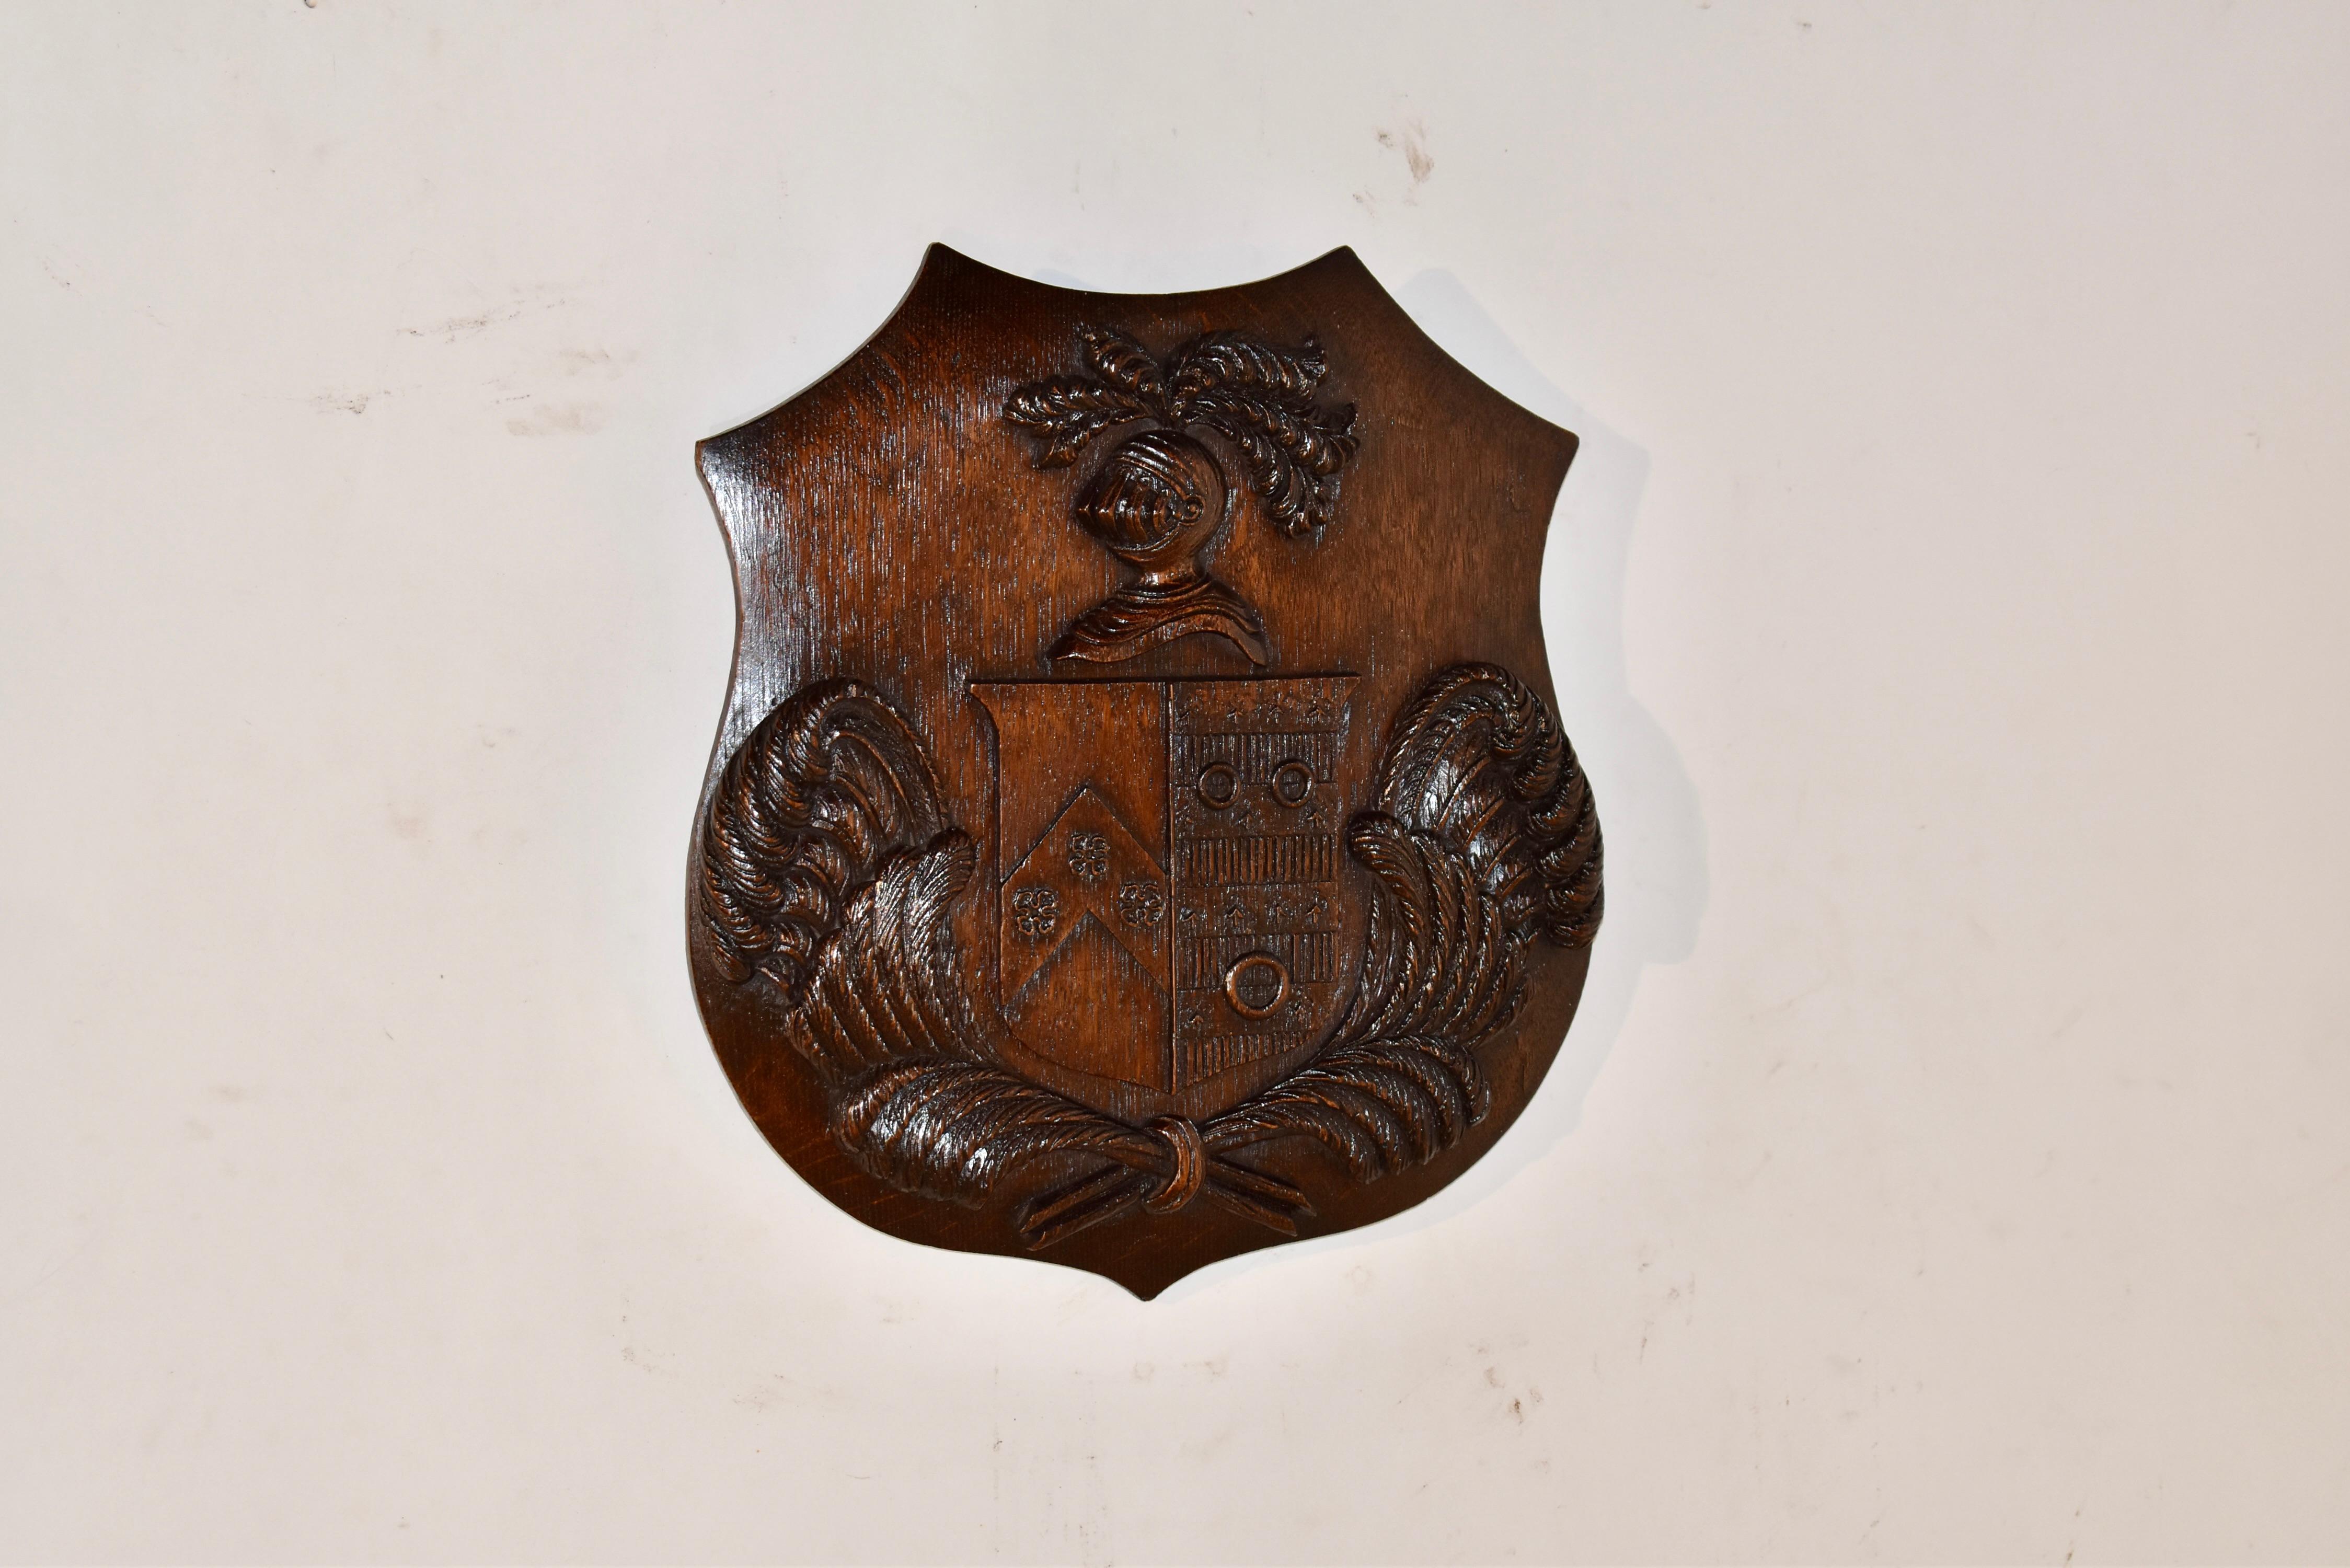 19th century hand carved armorial.  The plaque is shaped as a shield and carved upon it are a knight's head with plumes of feathers in his armor, over a carved shield.  The shield is above wonderfully hand carved feathers on both sides of the base